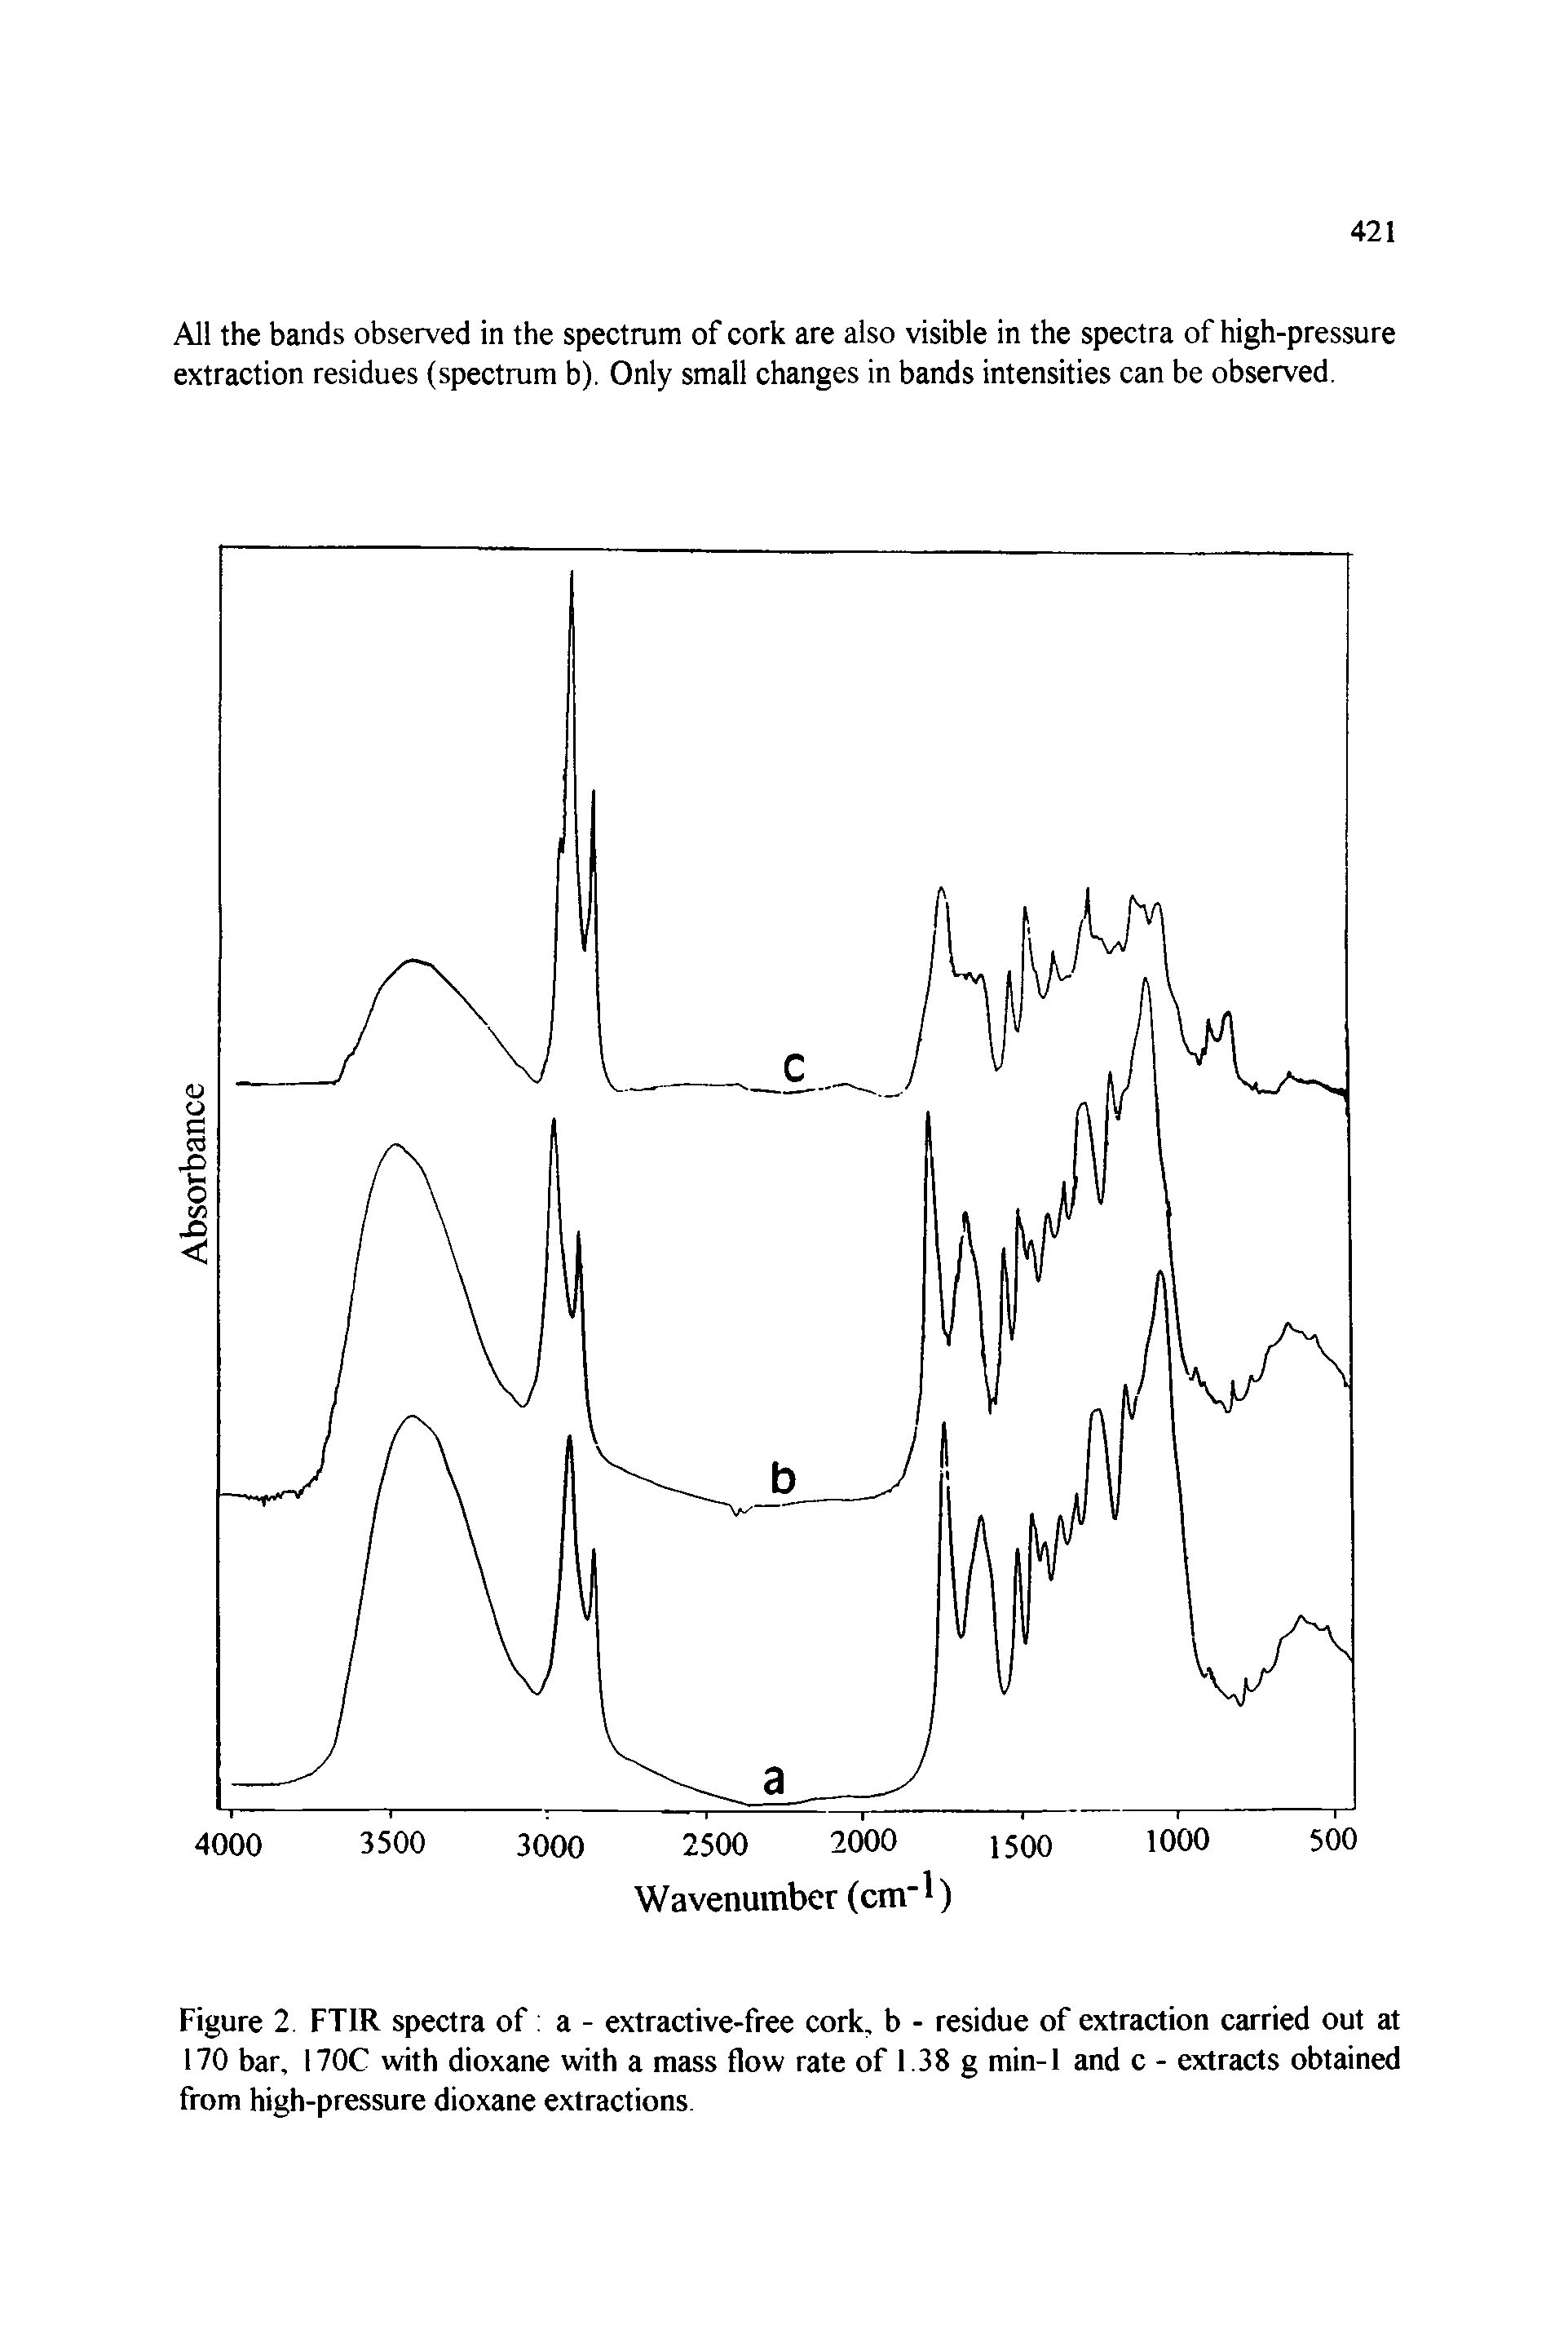 Figure 2 FT1R spectra of a - extractive-free cork, b - residue of extraction carried out at 170 bar, 170C with dioxane with a mass flow rate of 1.38 g min-1 and c - extracts obtained from high-pressure dioxane extractions.